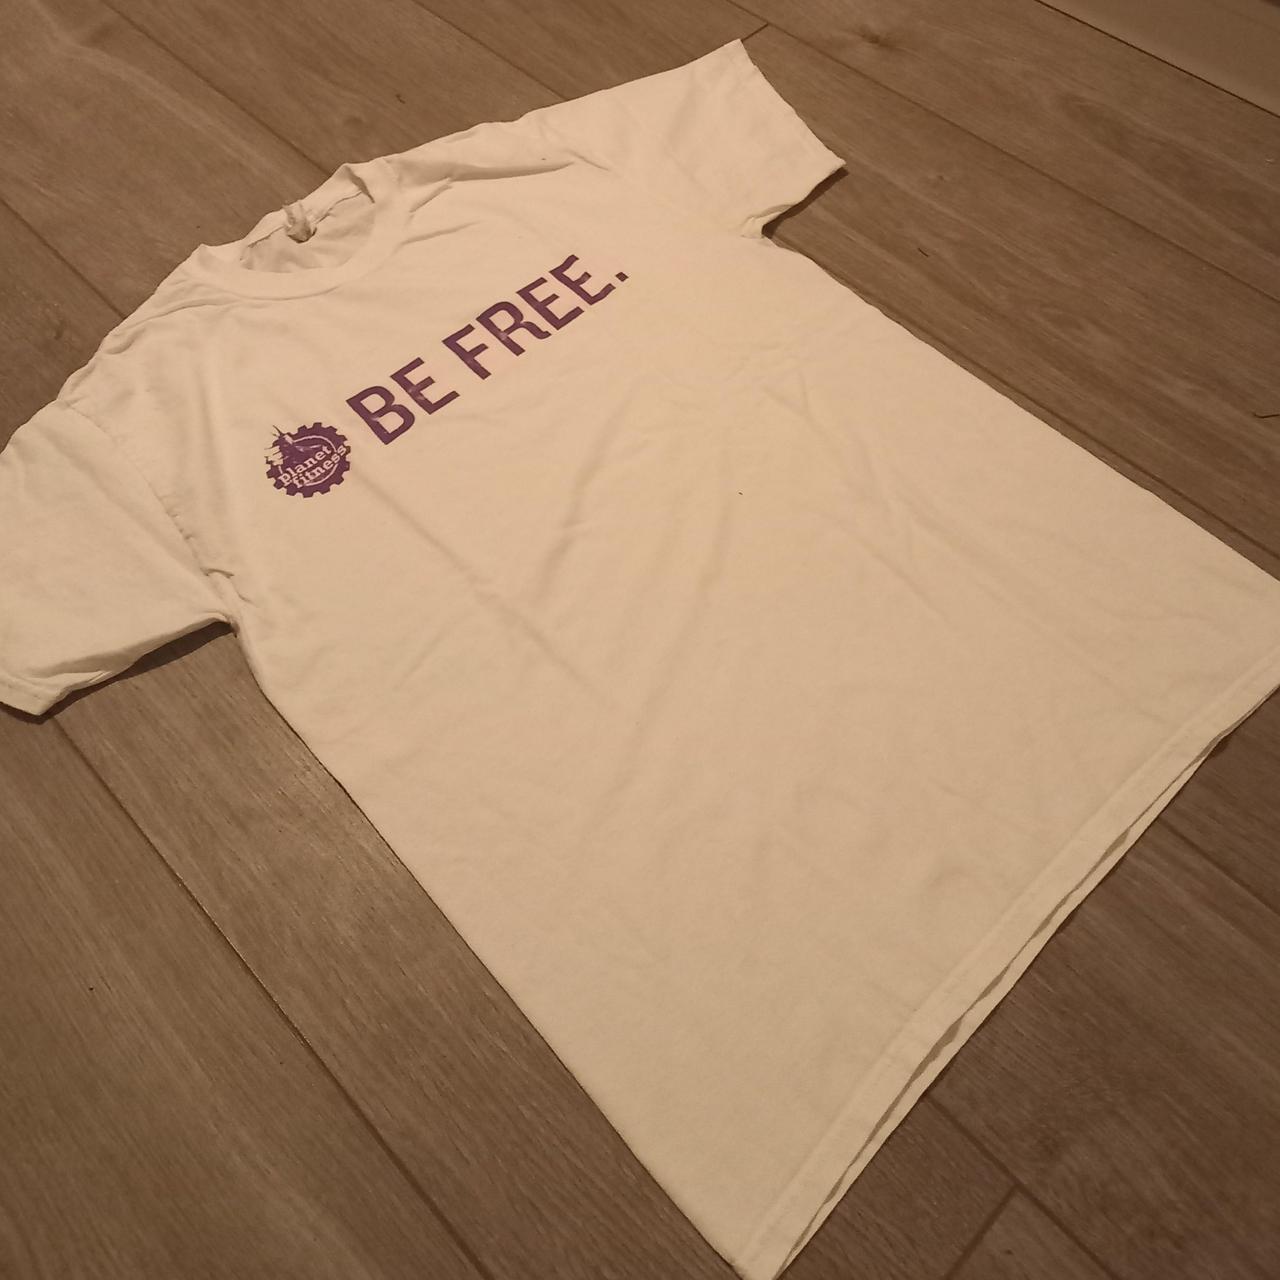 Planet Fitness “Be Free” T Shirt